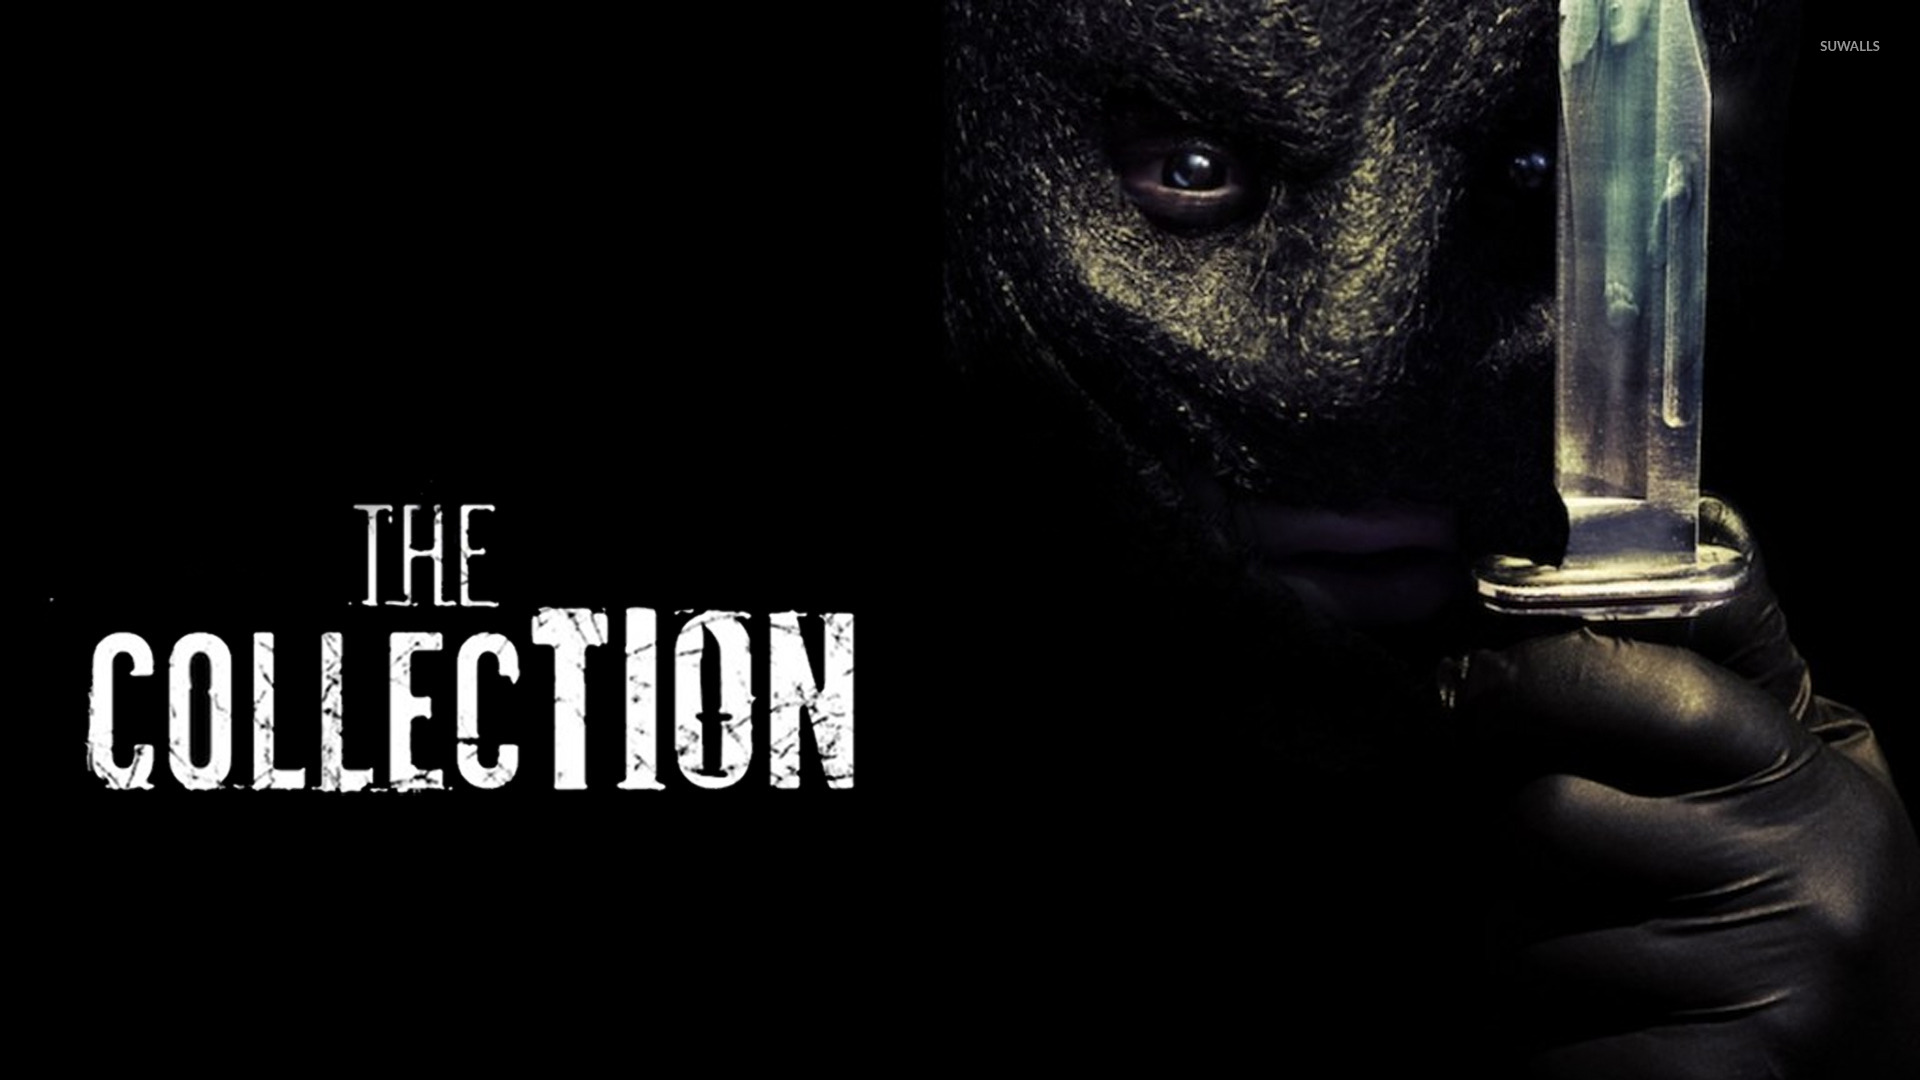 The Collector Collection wallpaper wallpaper